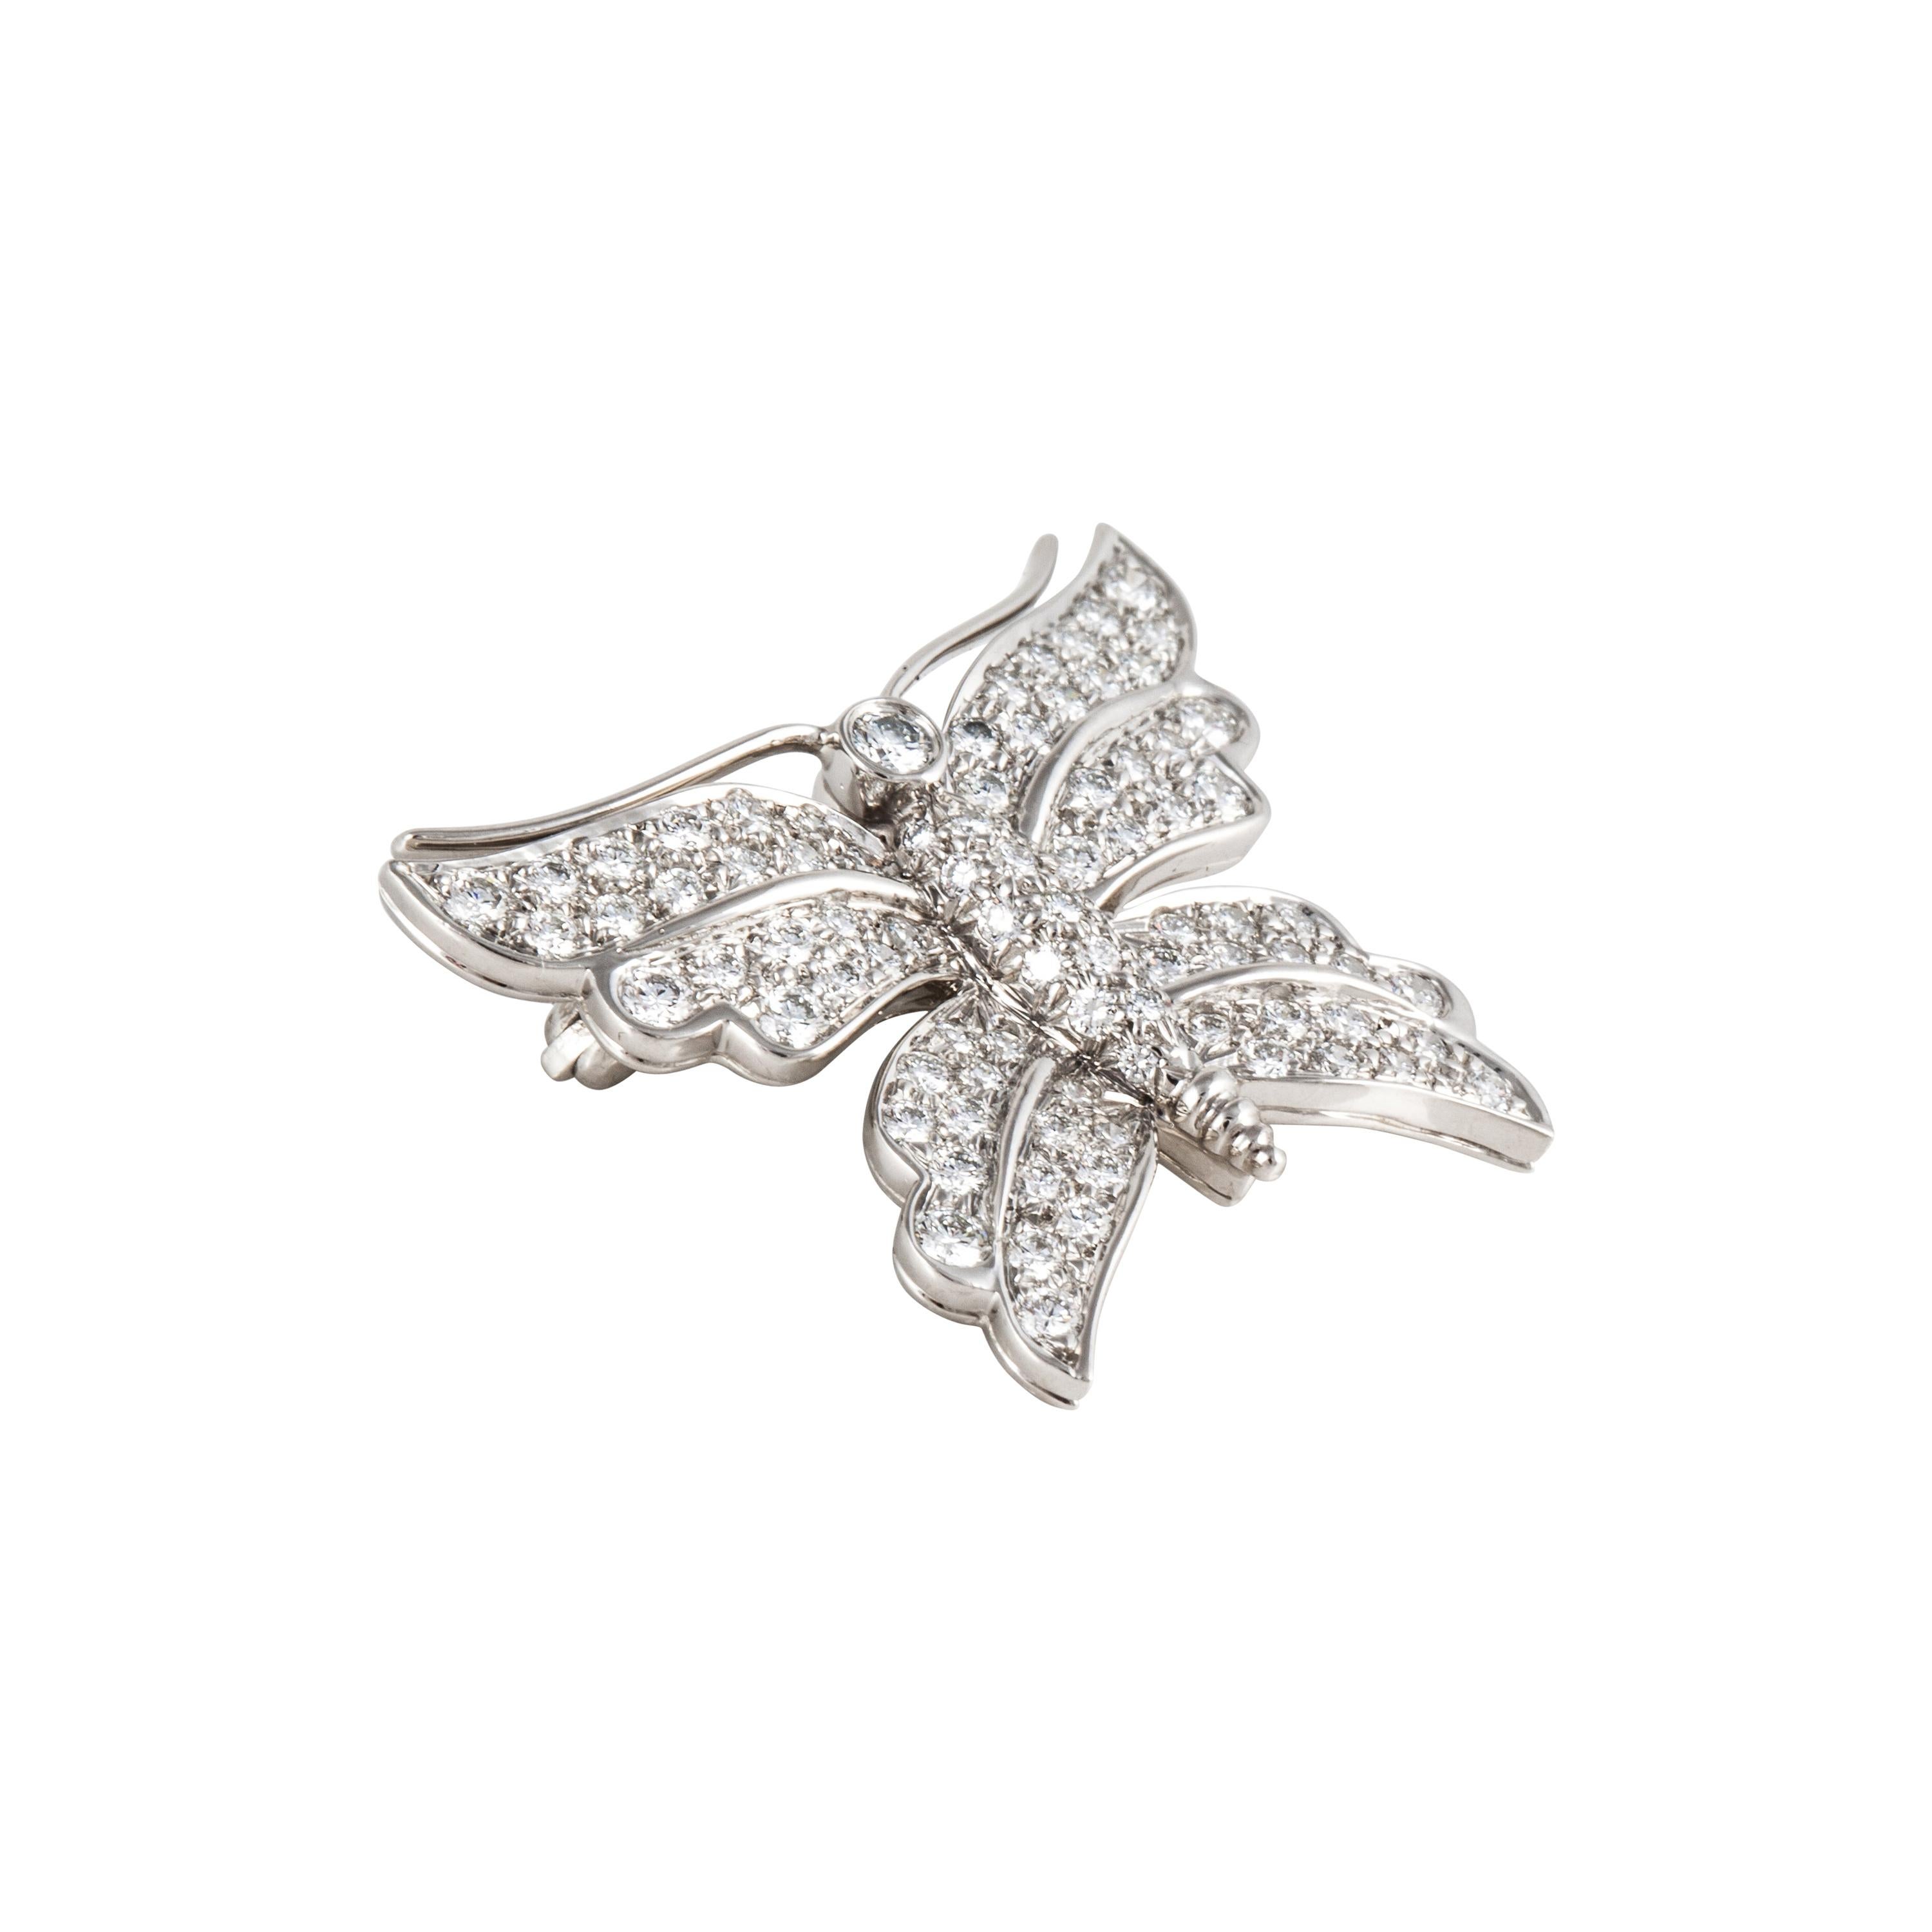 Tiffany & Co. butterfly pin composed of platinum with round diamonds.  There are 90 round diamonds that total 1.50 carats; F-G color and VS1-VS2 clarity.  Measures 1 1/8 inches by 7/8 inches.  Circa 1996.